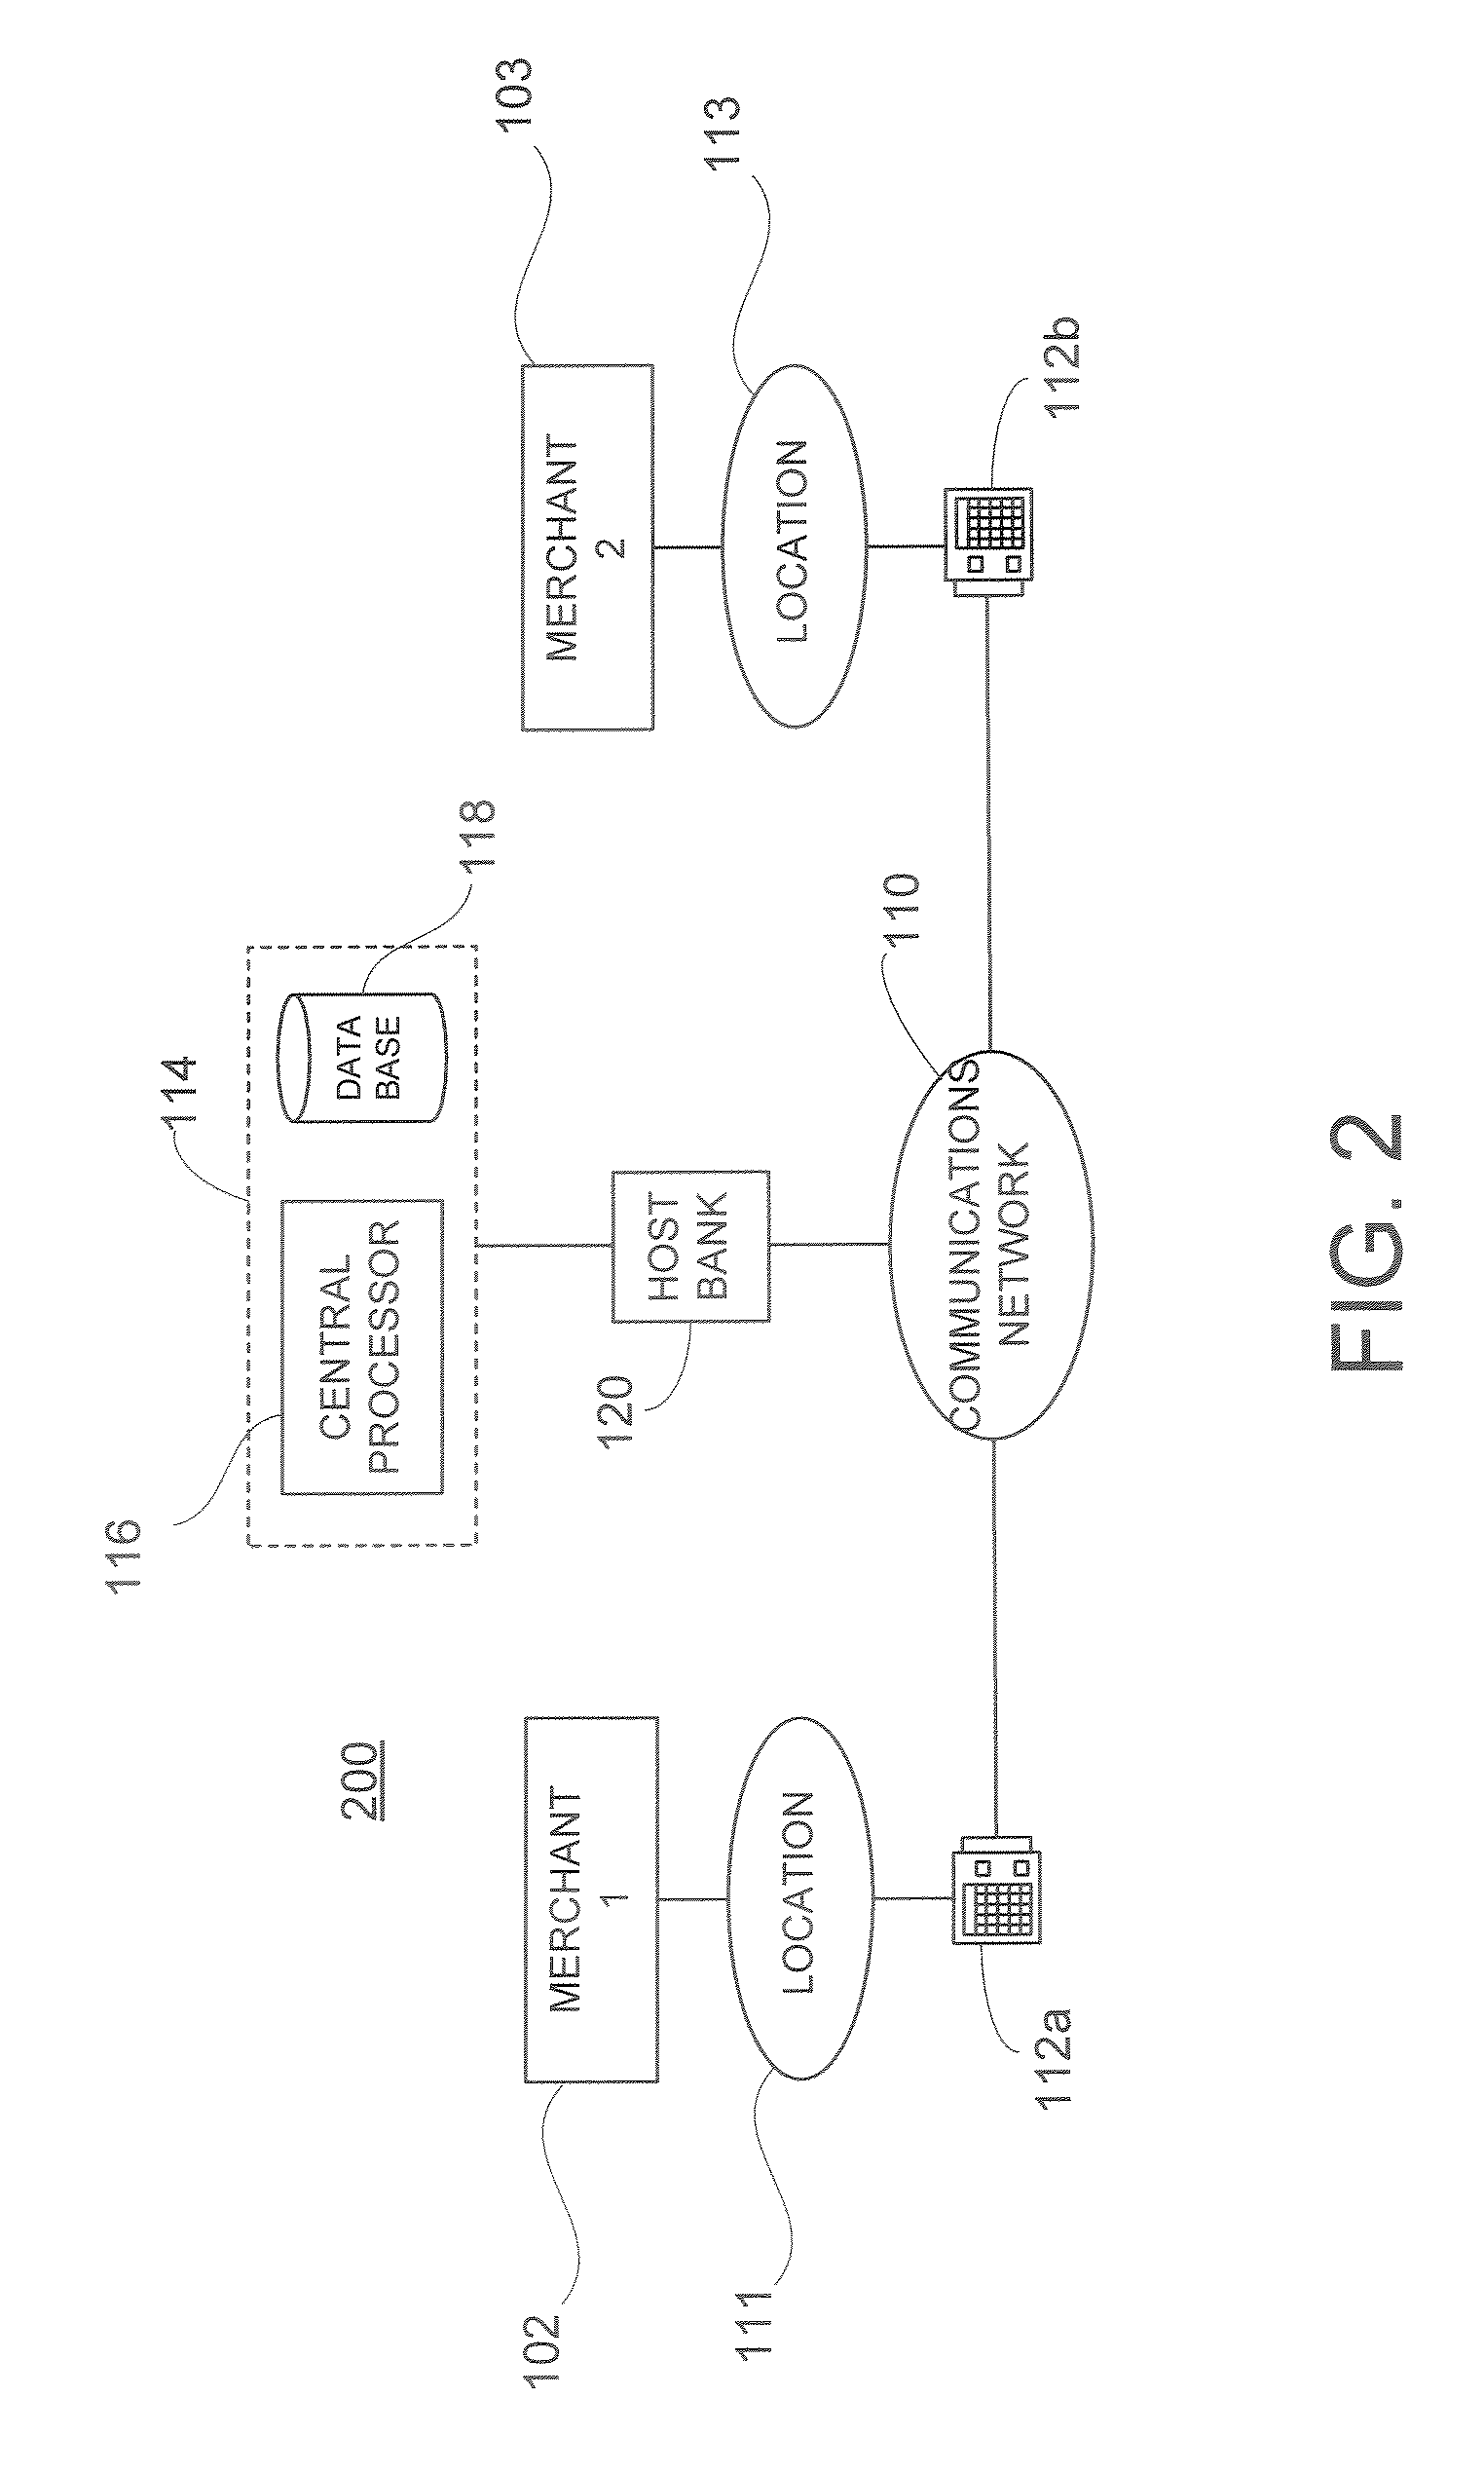 System and Method For Authorizing Stored Value Card Transactions